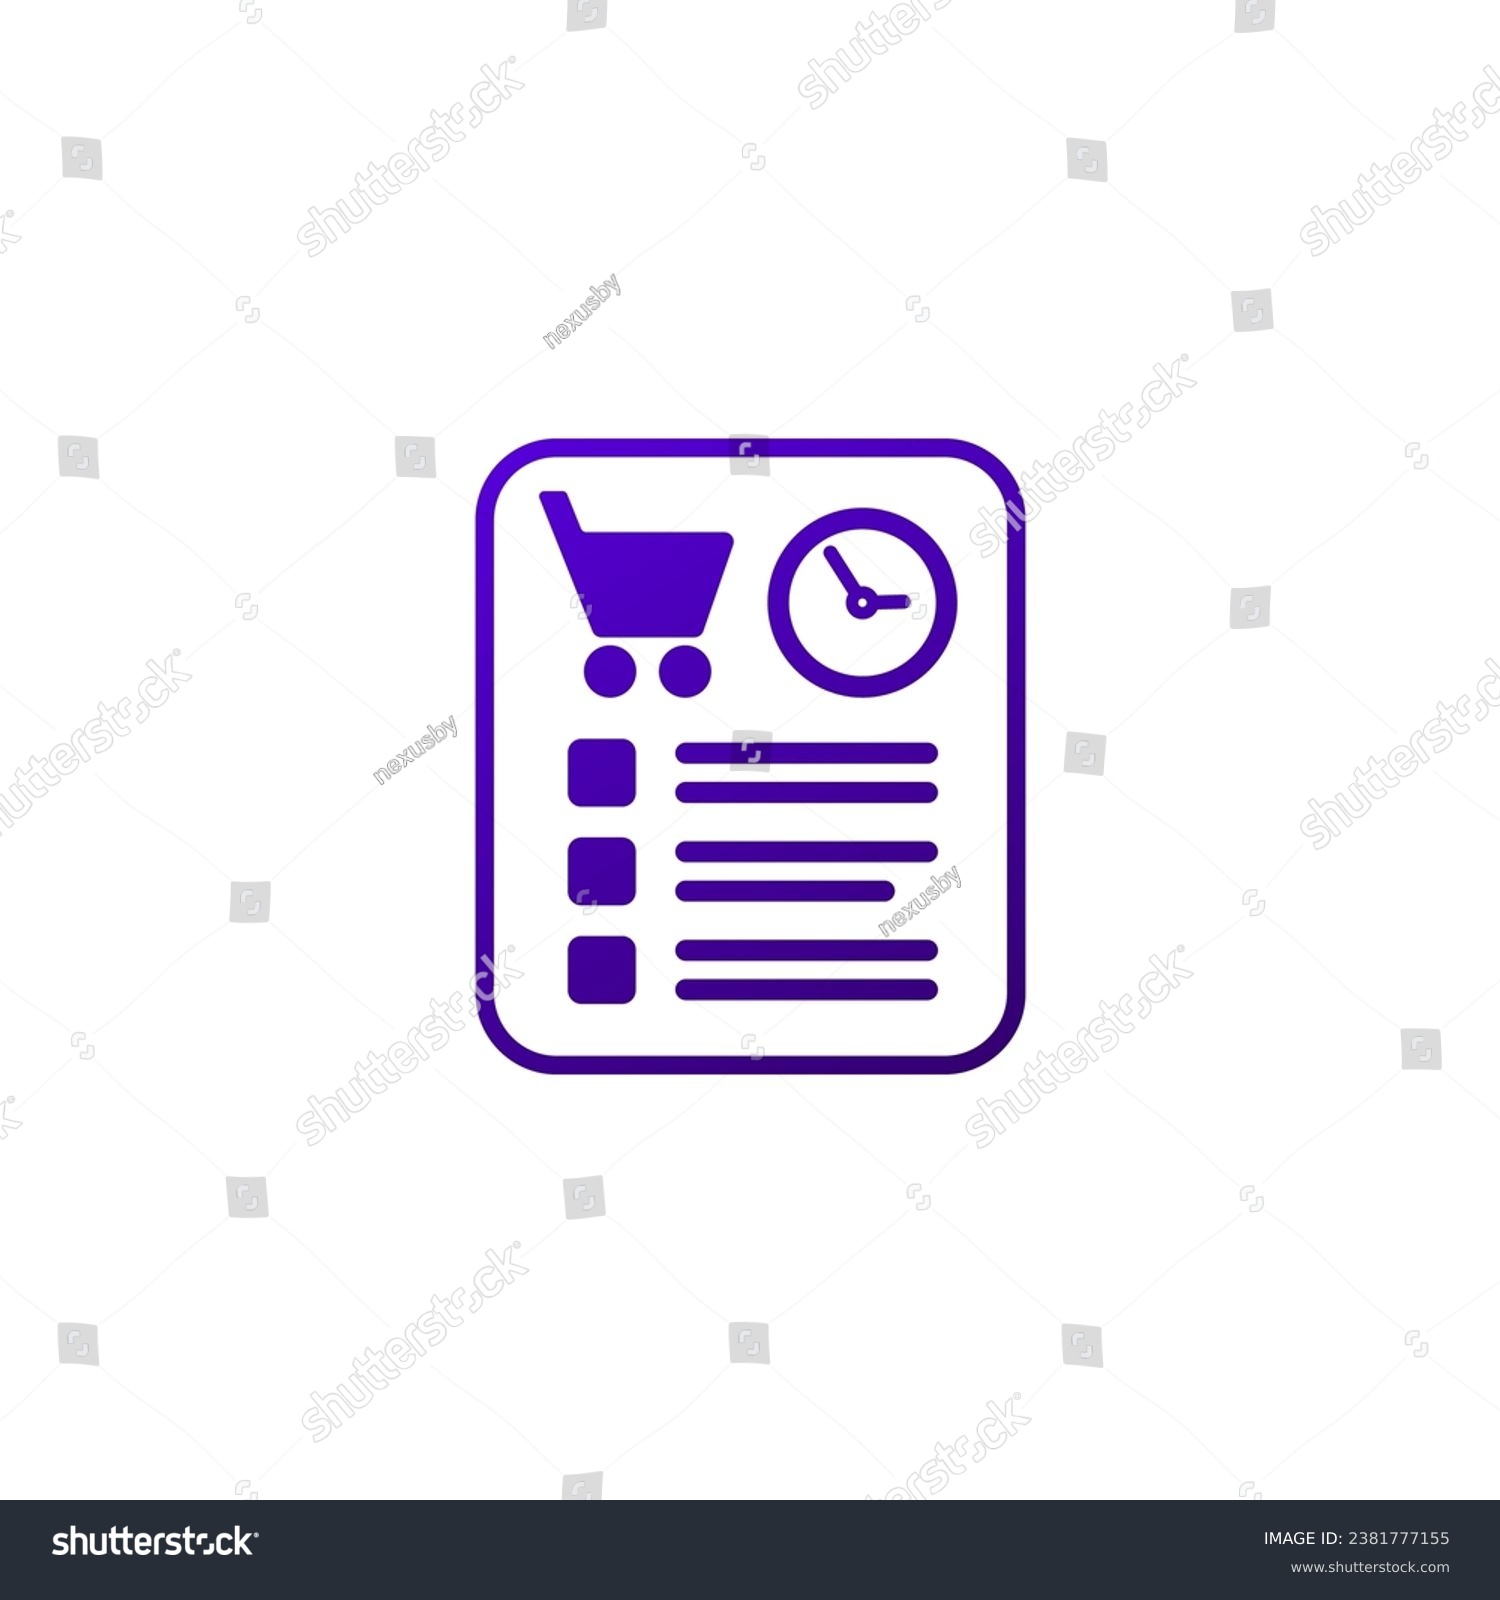 SVG of order history or last purchase icon on white svg